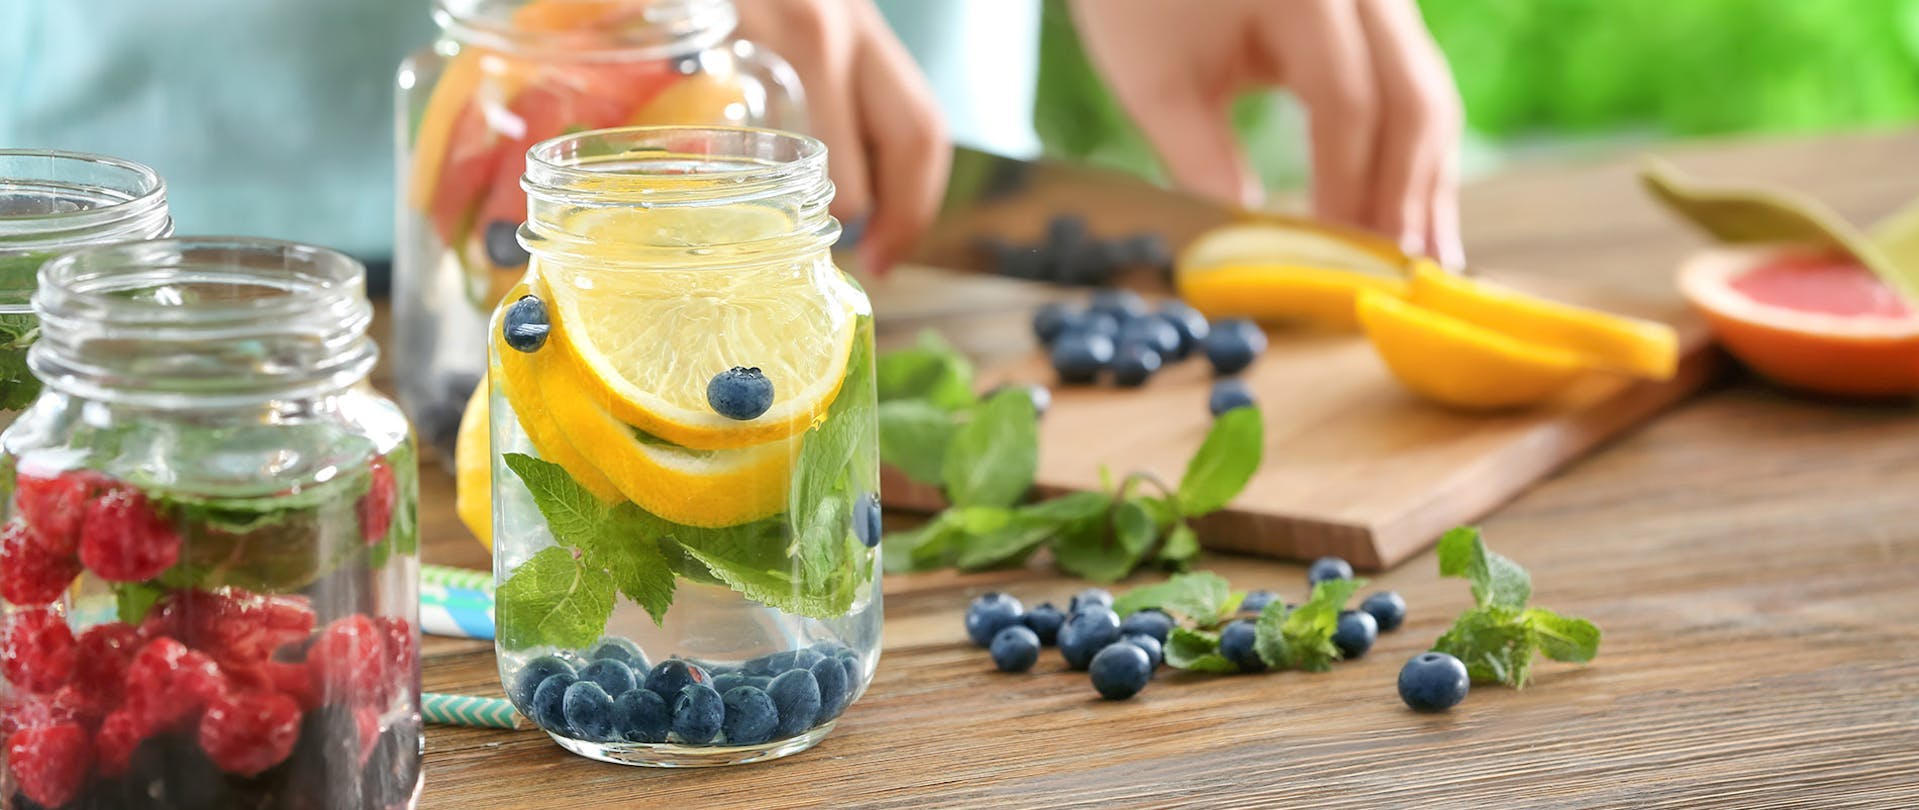 Infused Water Recipes Woman Cuts Fruits